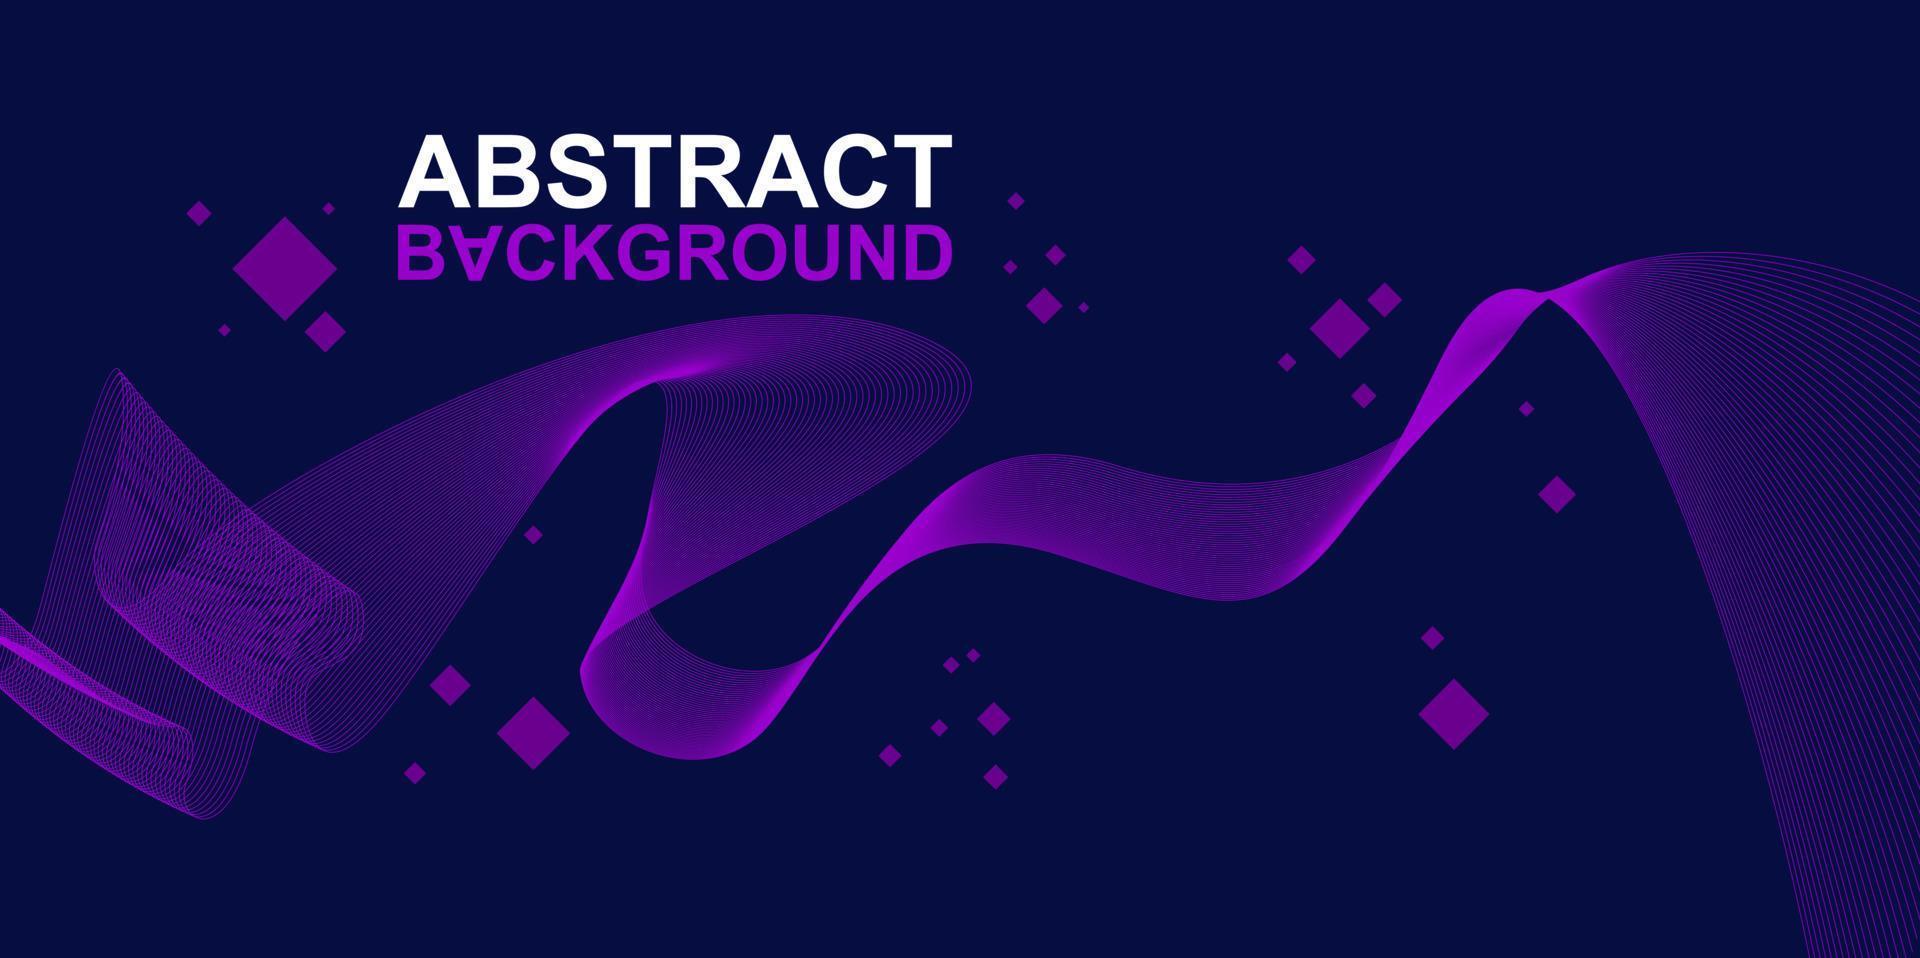 Abstract background with bright colored curved lines vector